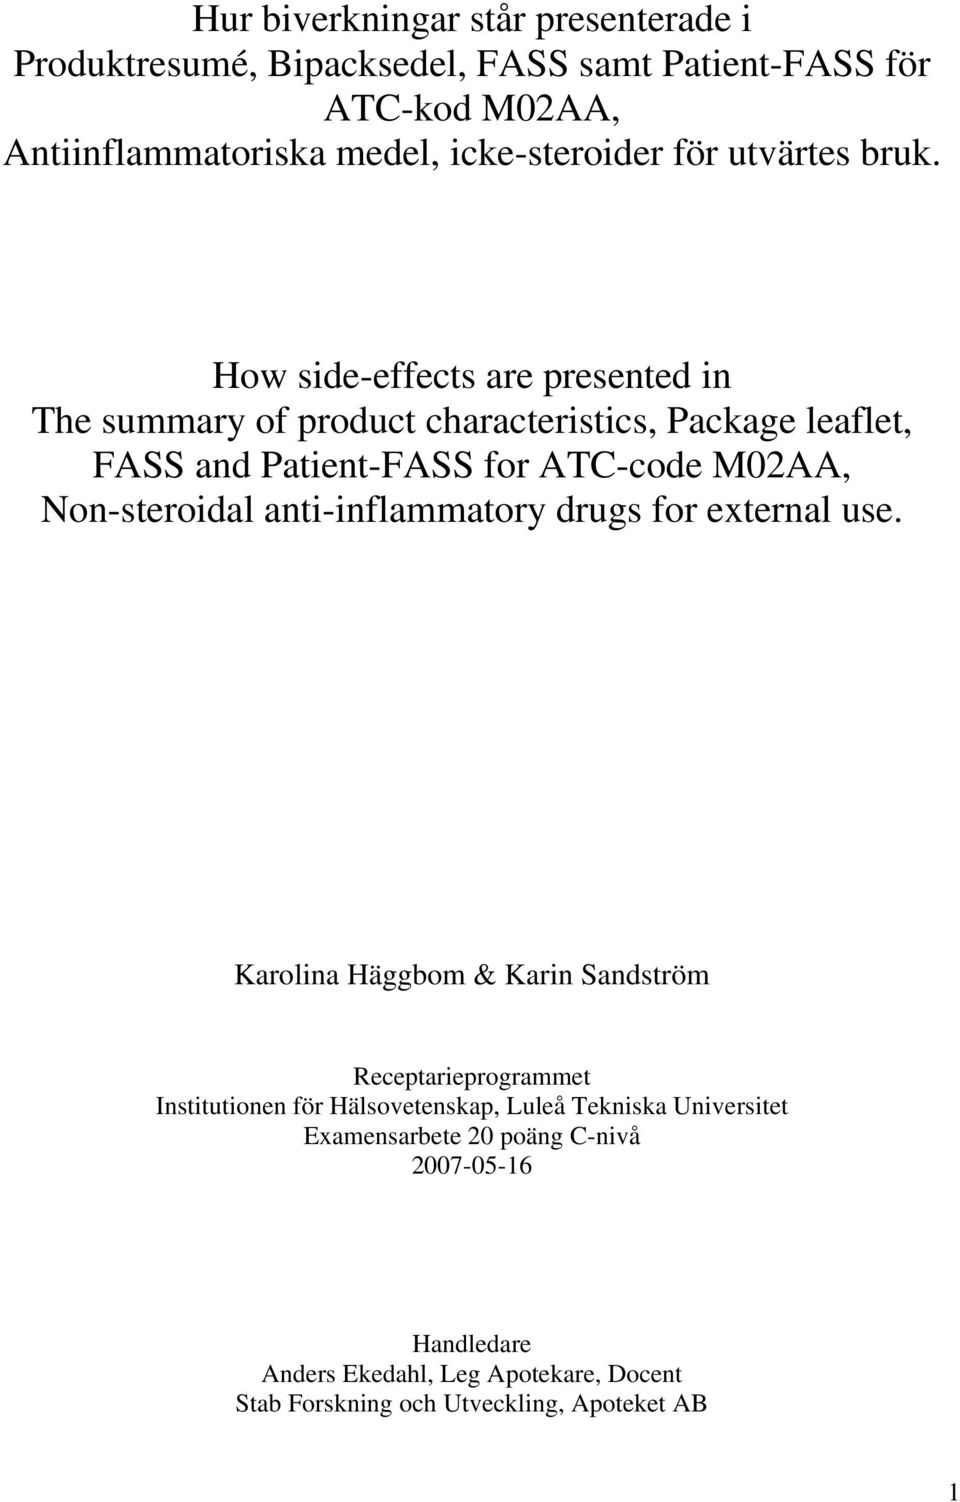 How side-effects are presented in The summary of product characteristics, Package leaflet, FASS and Patient-FASS for ATC-code M02AA, Non-steroidal